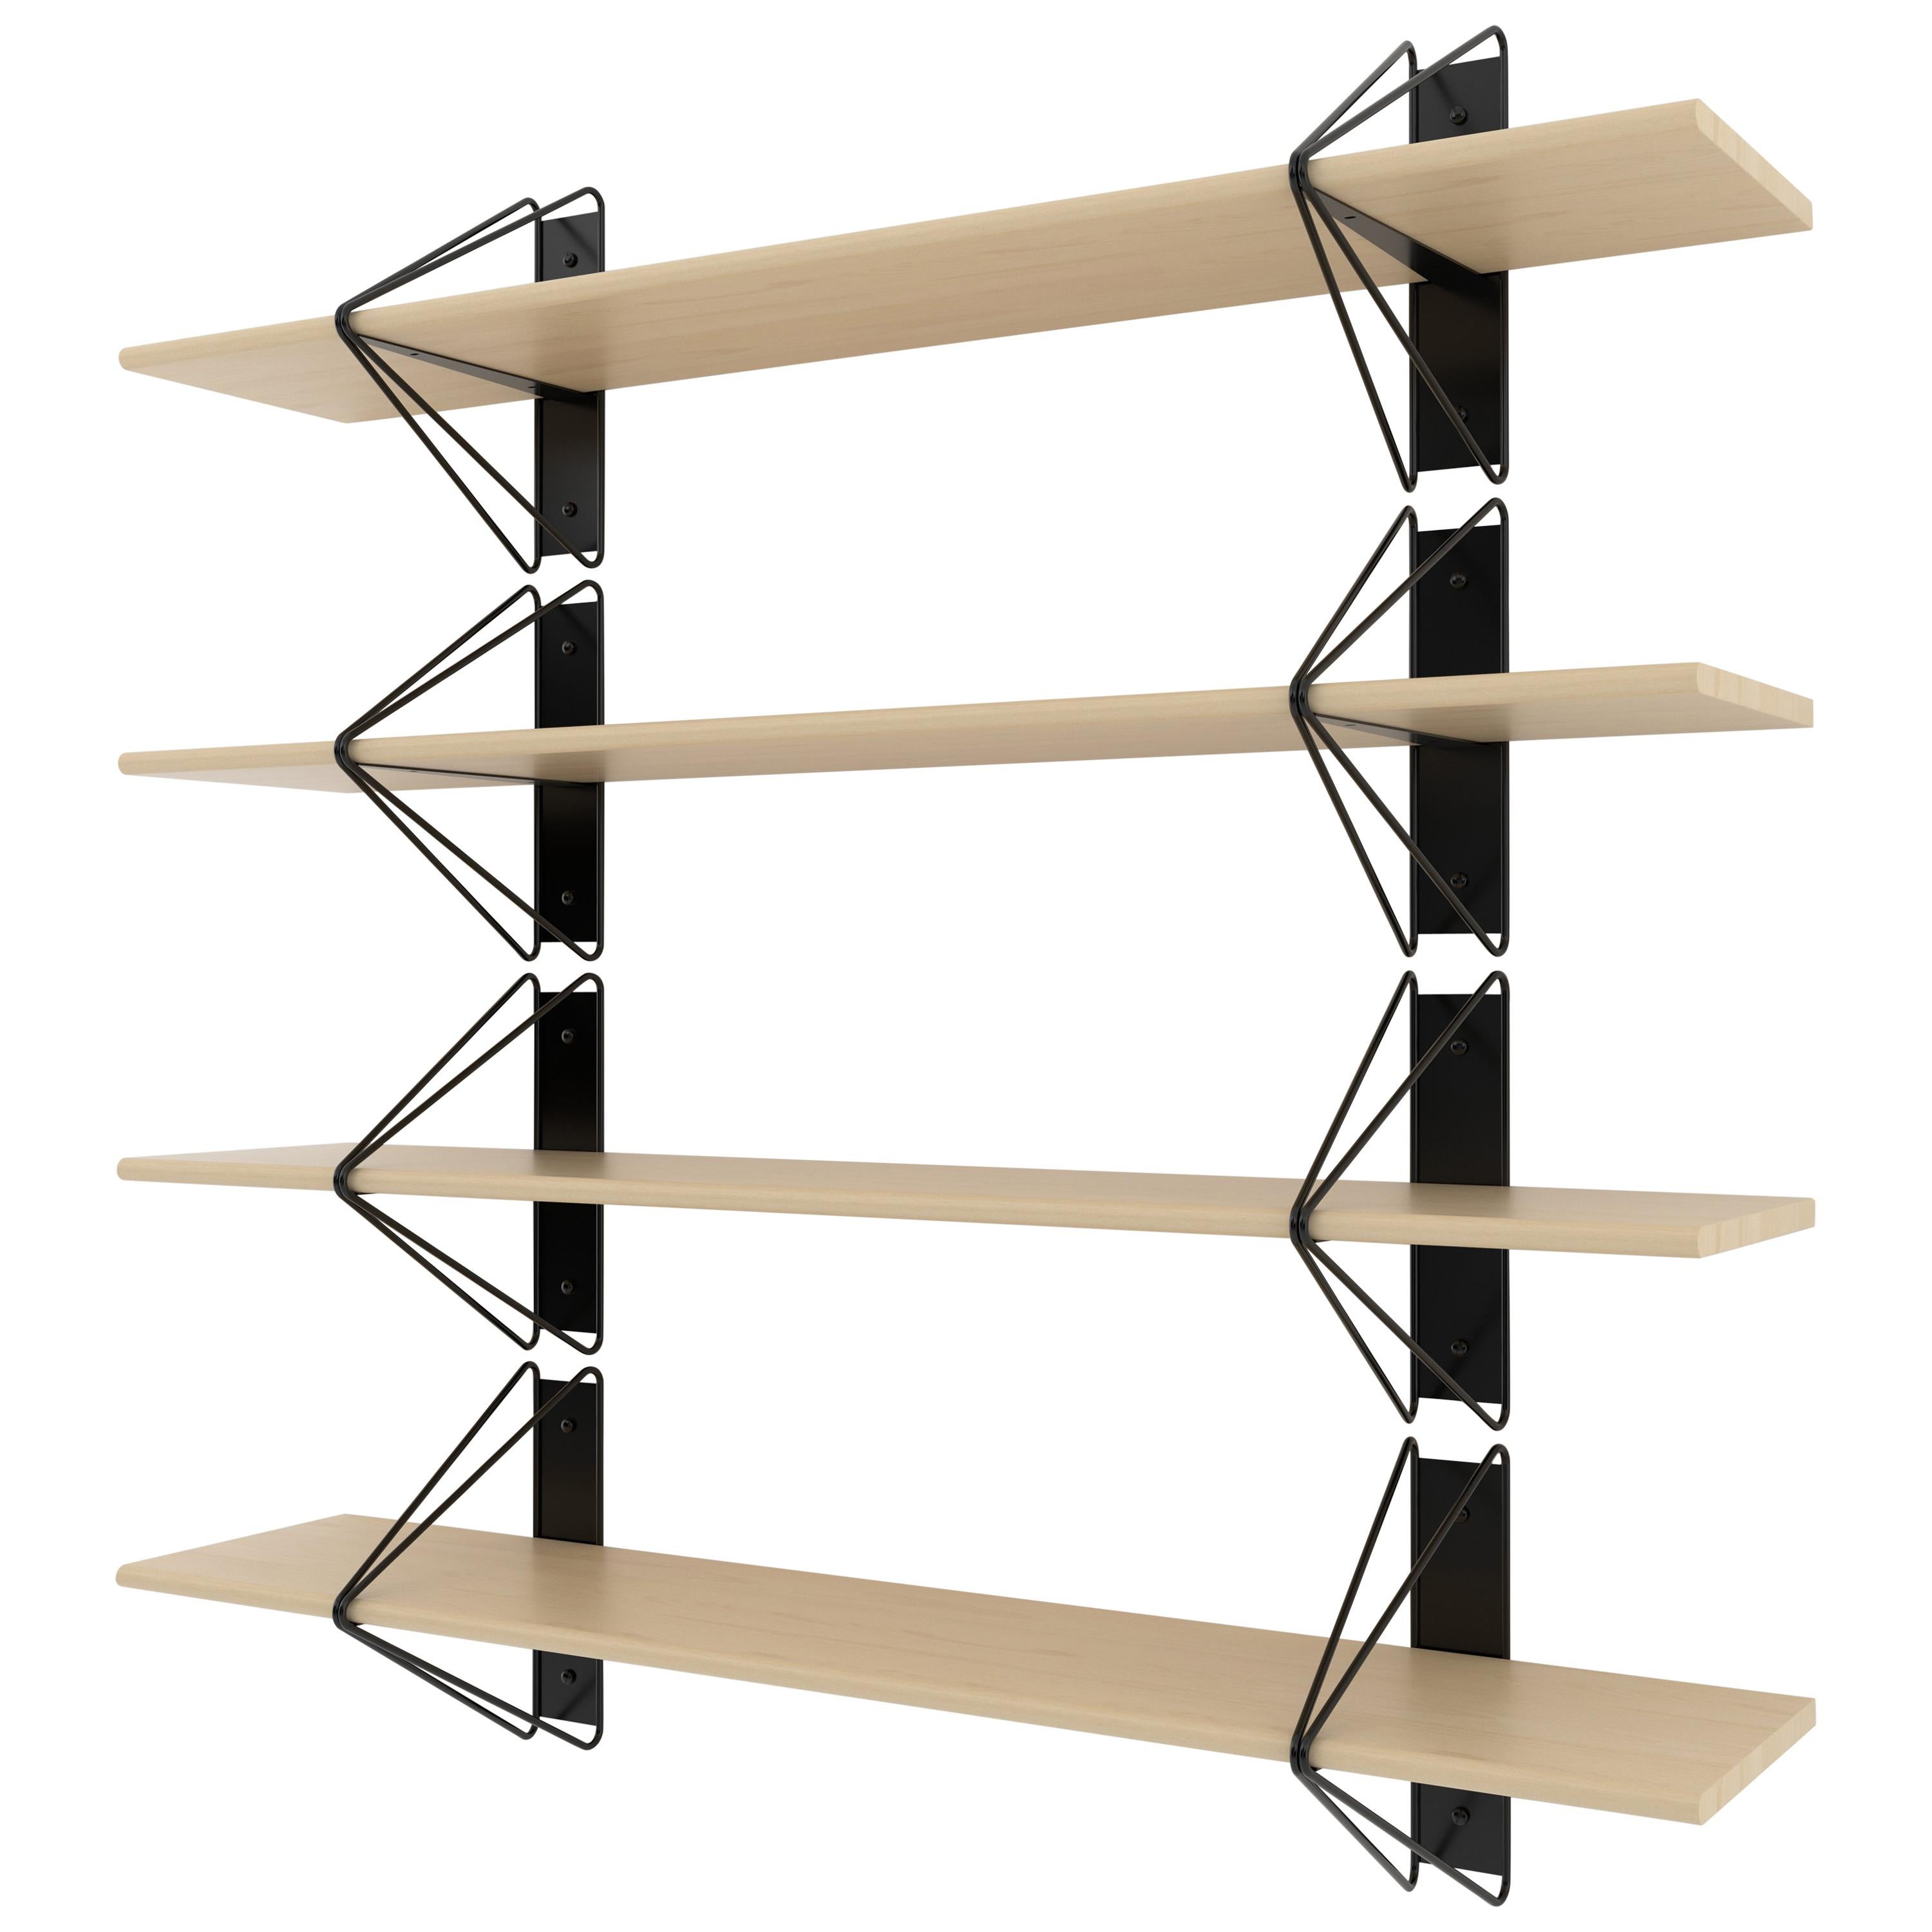 American Set of 4 Strut Shelves from Souda, Black, Made to Order For Sale